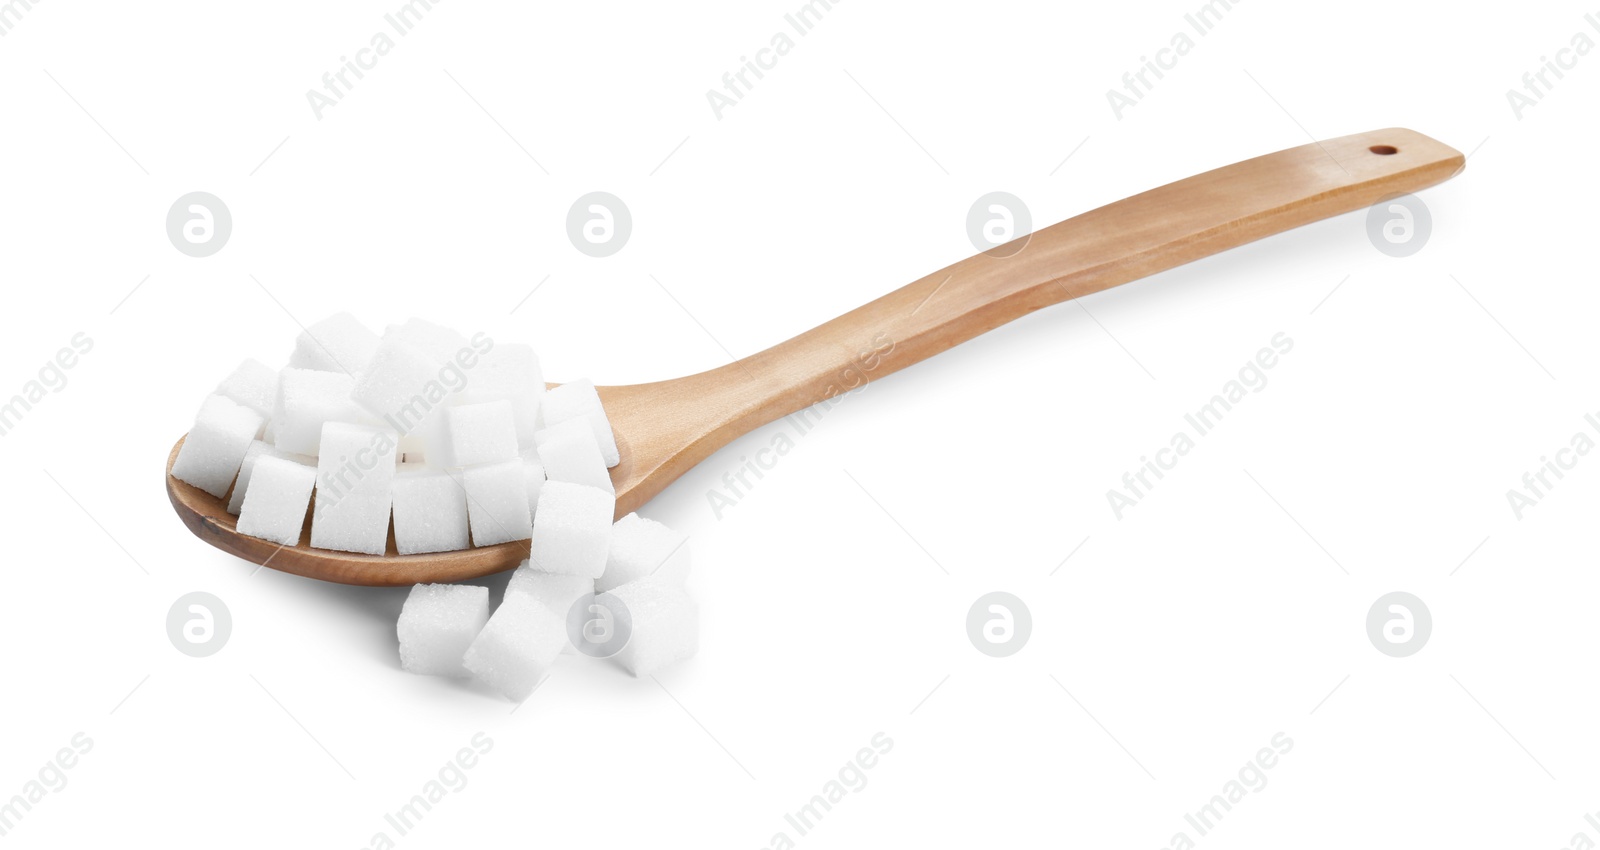 Photo of Sugar cubes and wooden spoon isolated on white